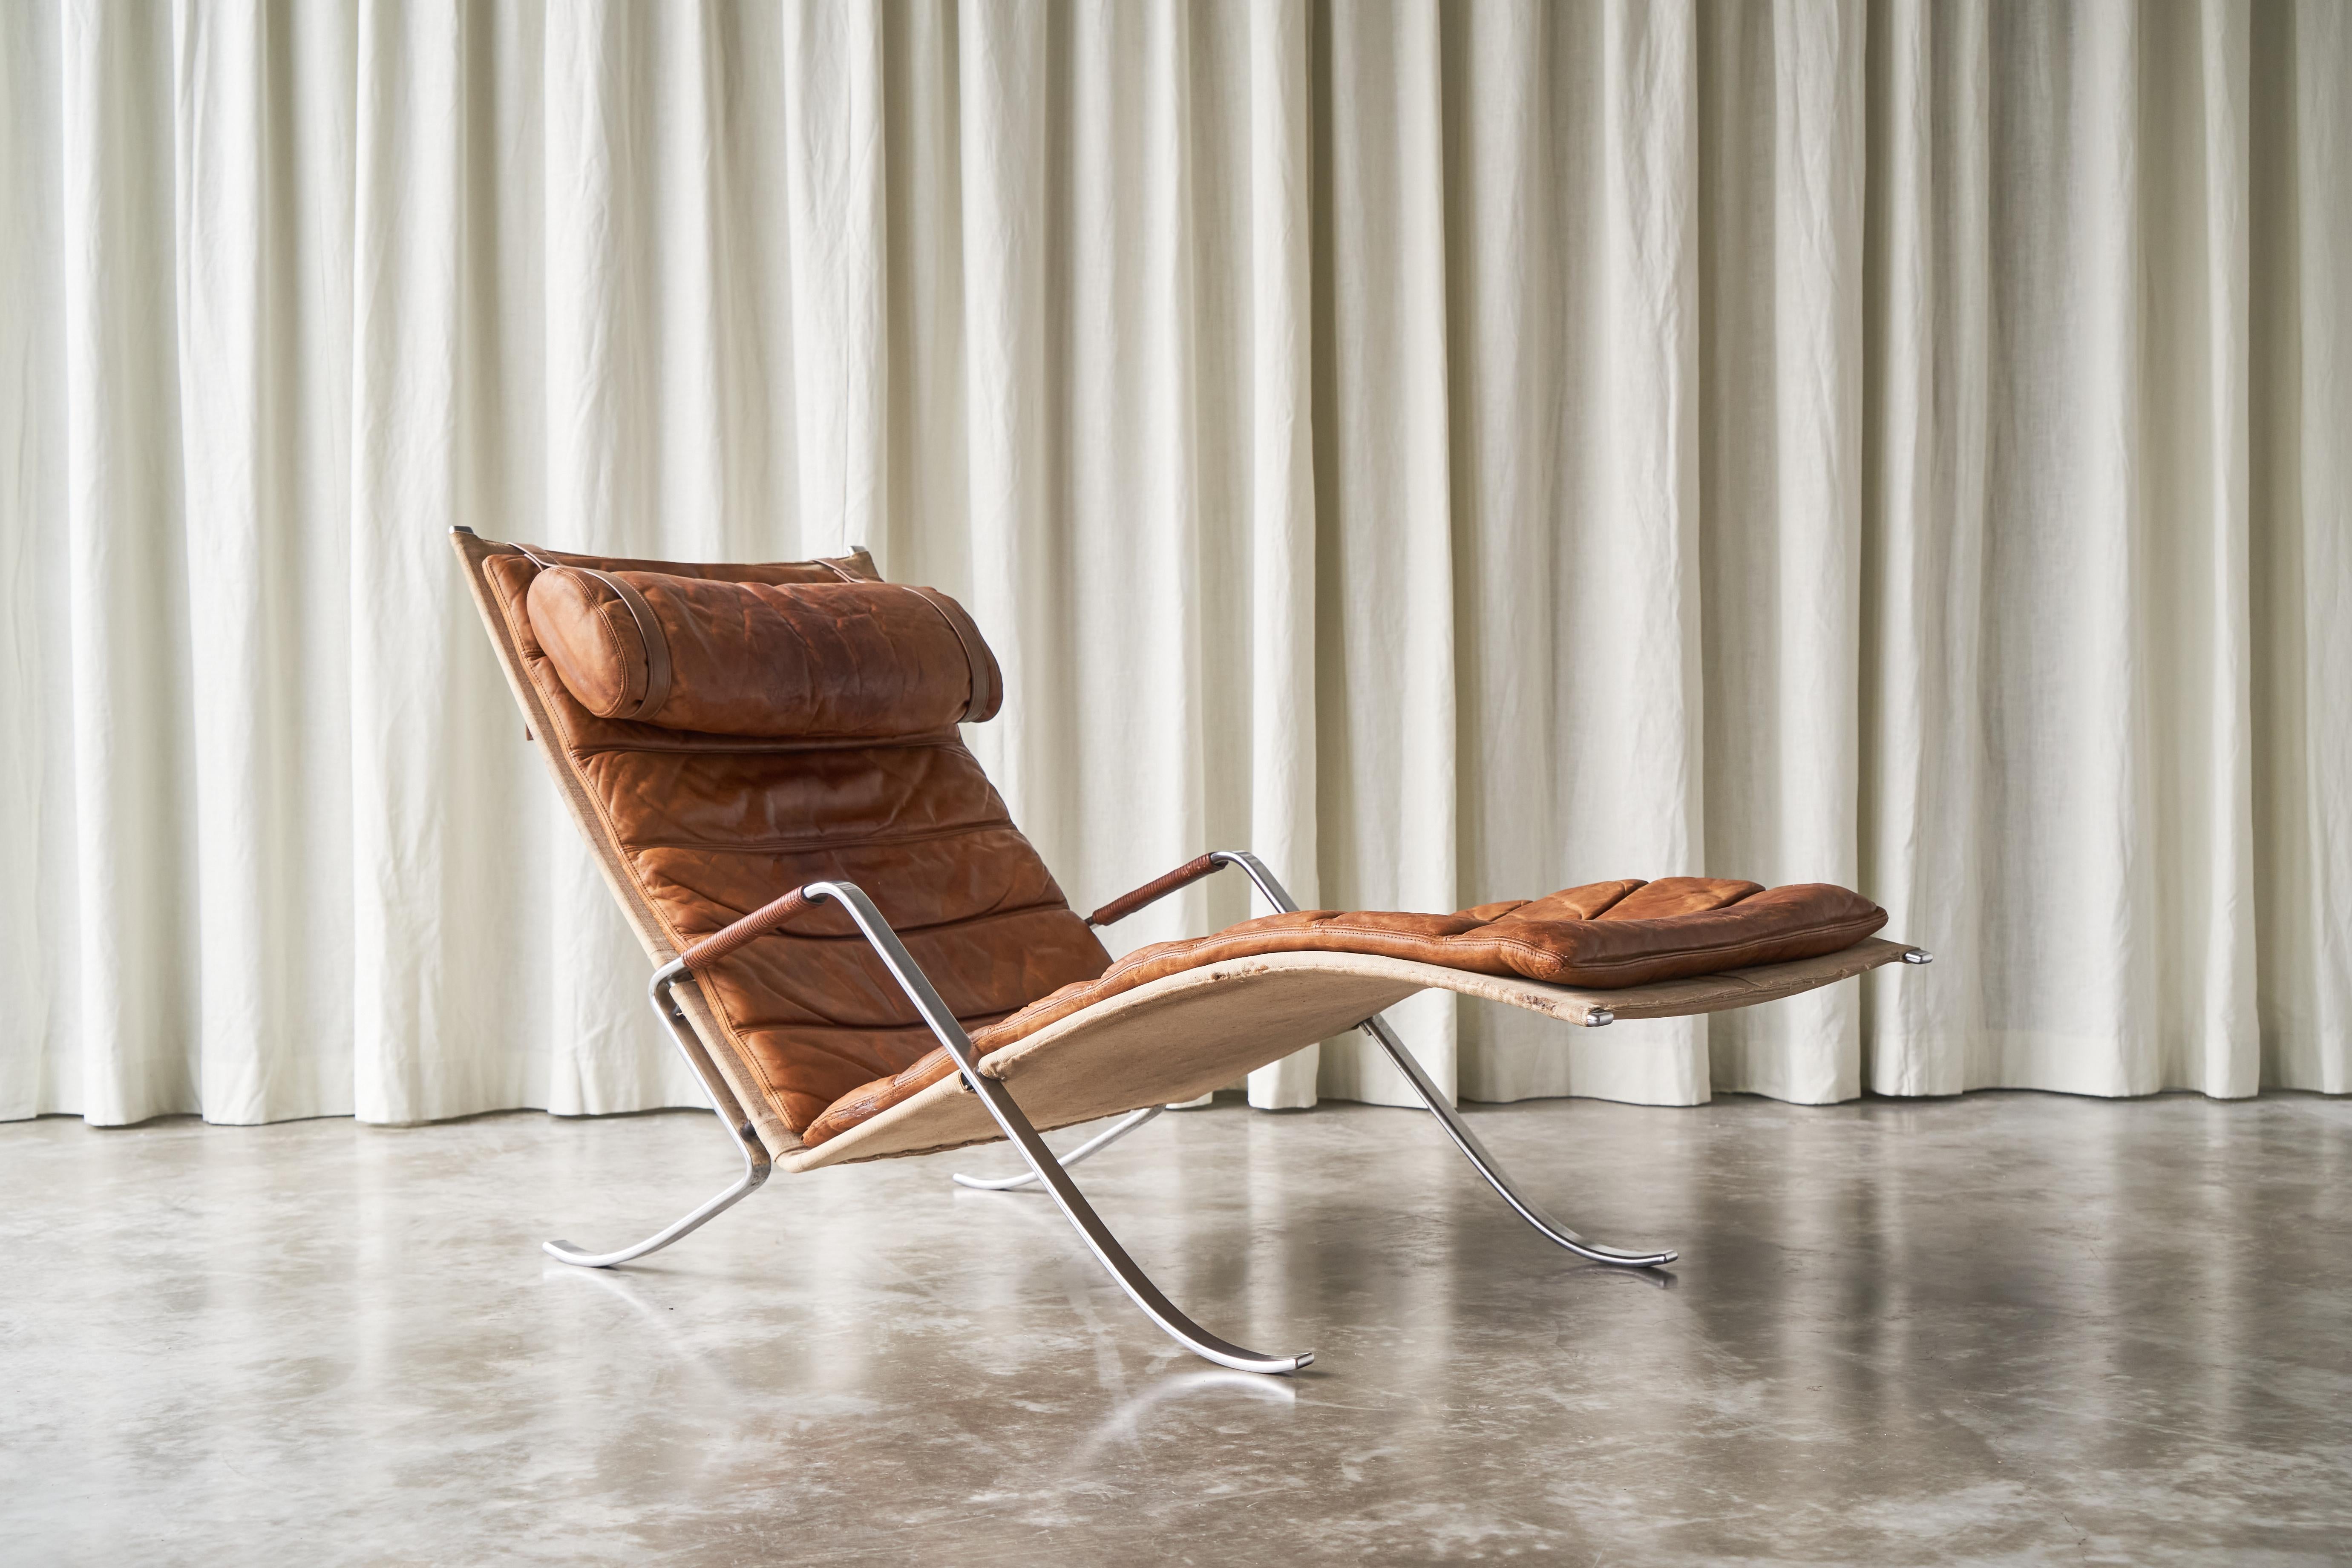 Fabricius & Kastholm FK87 Lounge Chair in Patinated Cognac Leather 1960s For Sale 1